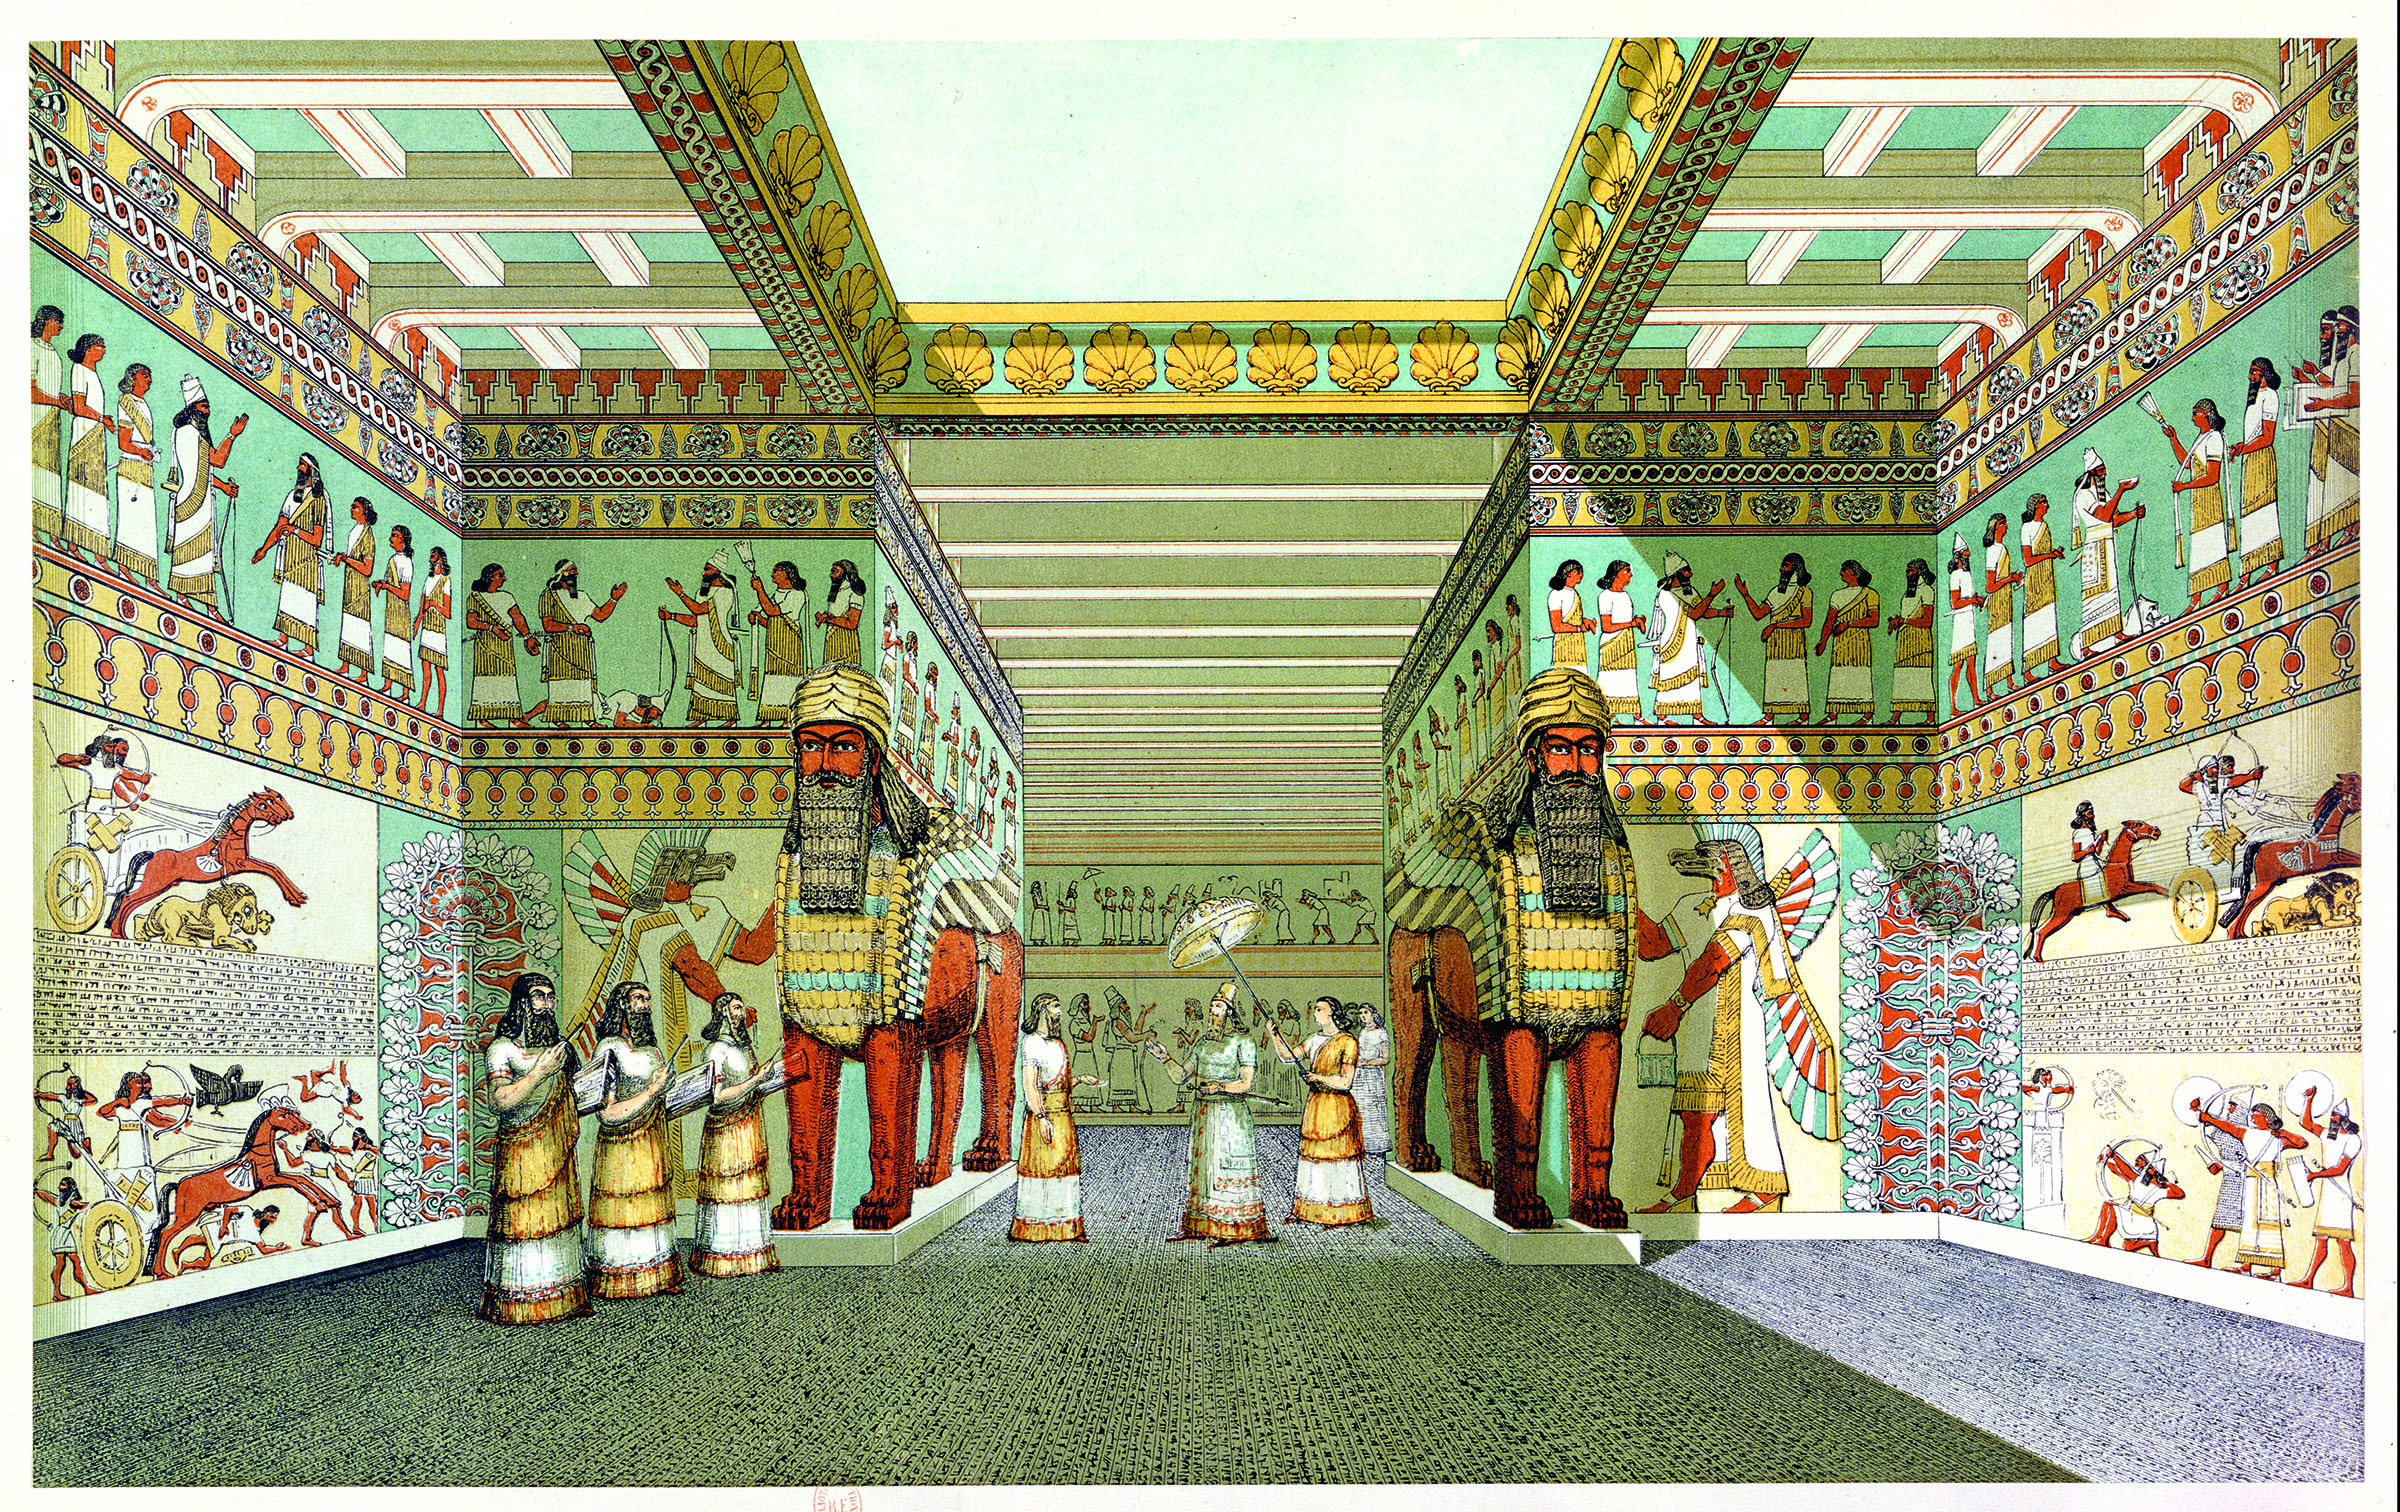 <p>This artist&rsquo;s depiction of the grand entrance to a four-chambered temple built by Ashurnasirpal <small>II</small> at the northwest part of Nimrud was excavated under Layard and Rassam in 1846. It shows the human-headed lions that today stand on display in London <i>(next)</i>; the artist also showed the palace in the vivid colors that may have resembled its original condition.&nbsp;</p>
